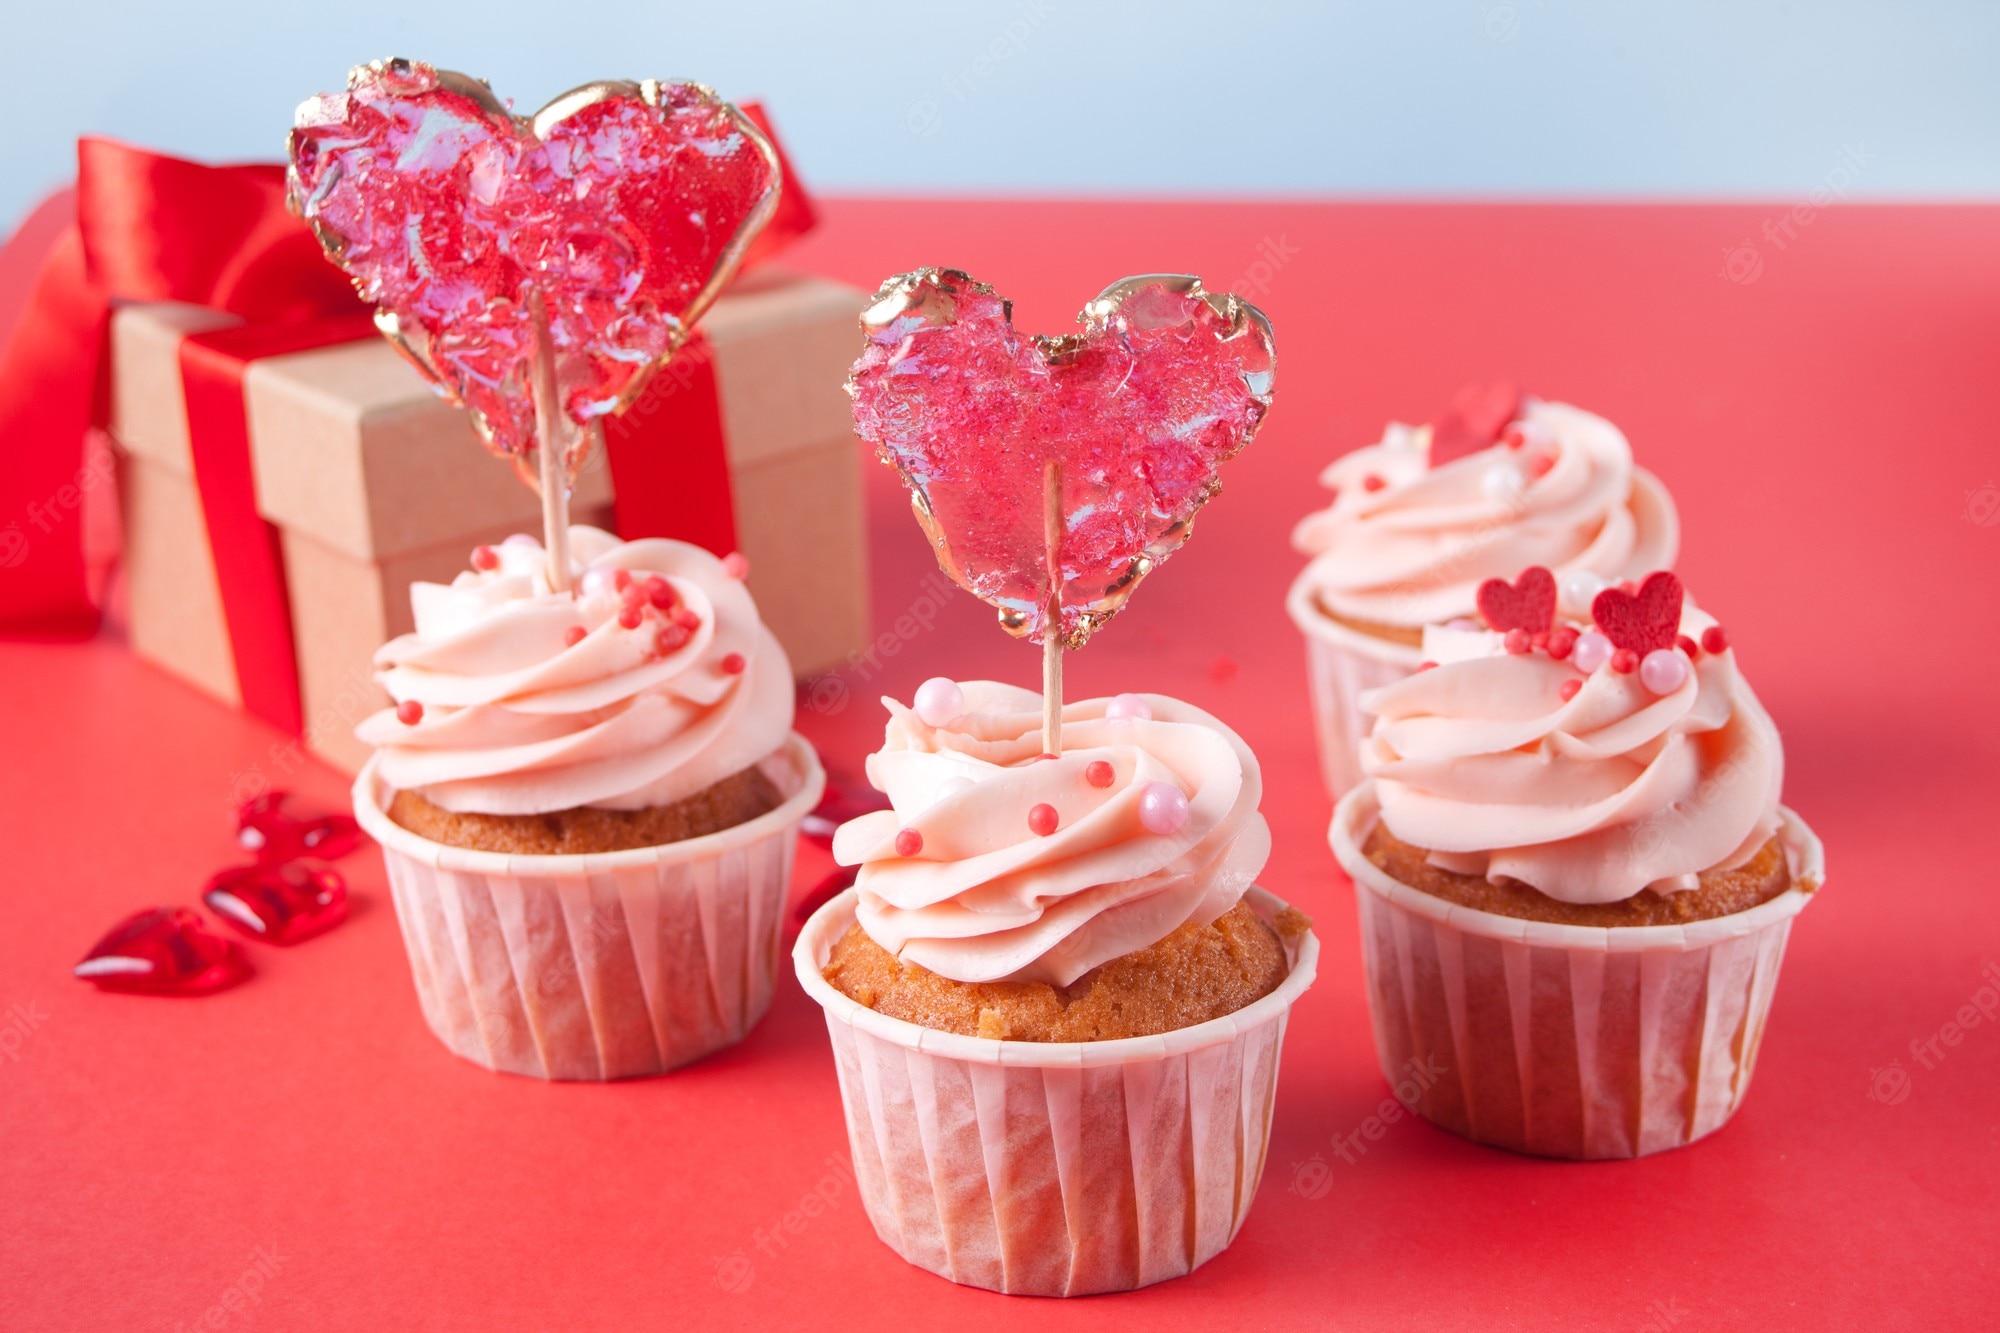 Valentines day cupcakes Image. Free Vectors, & PSD